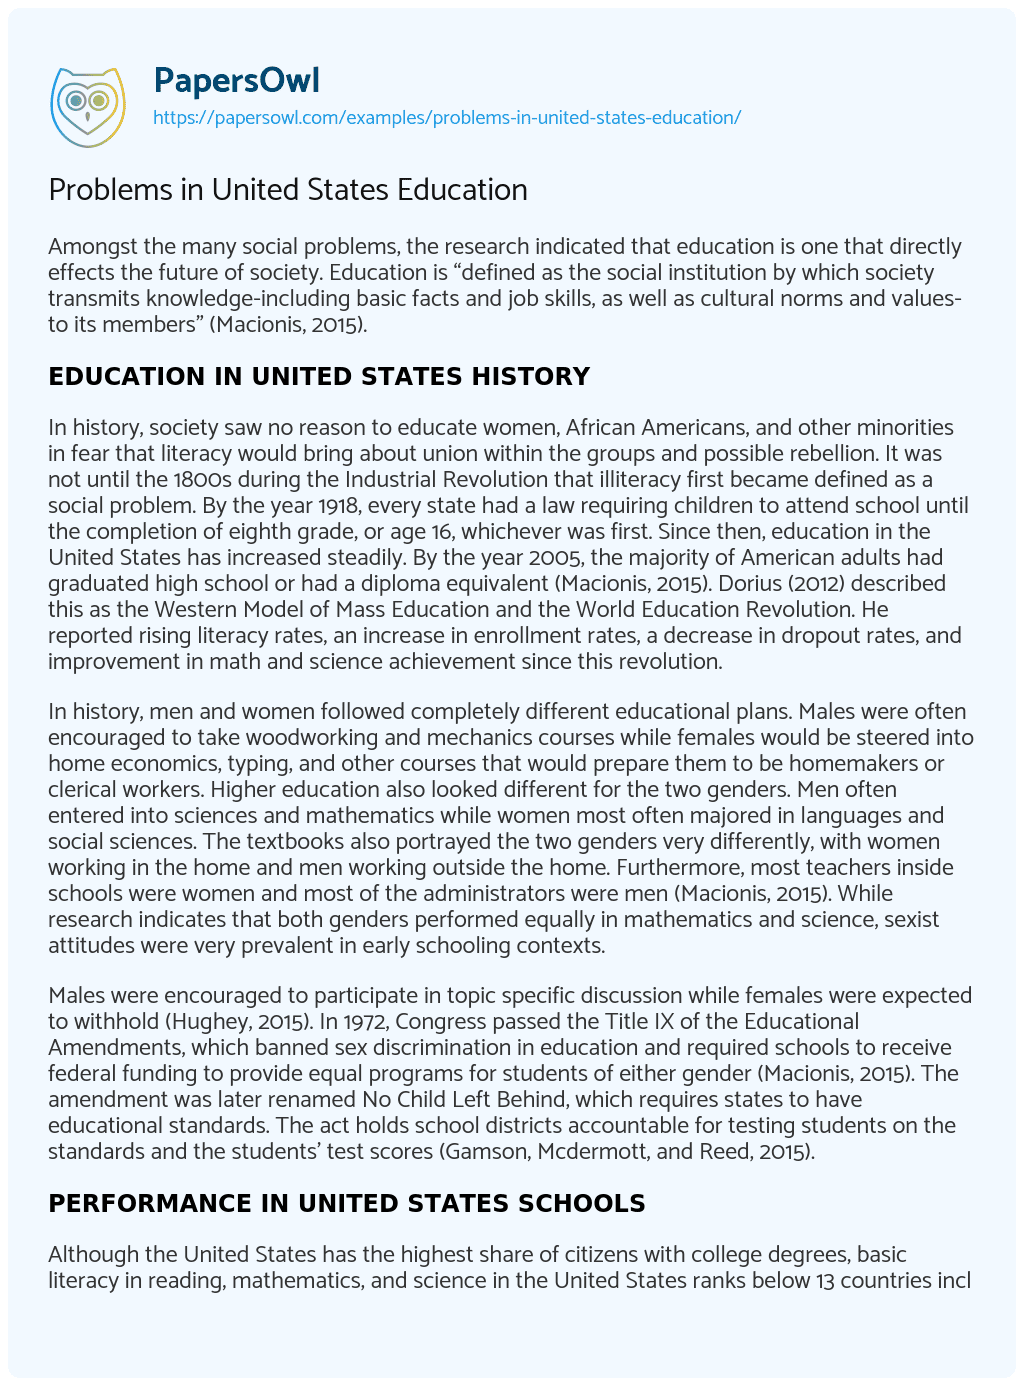 Essay on Problems in United States Education